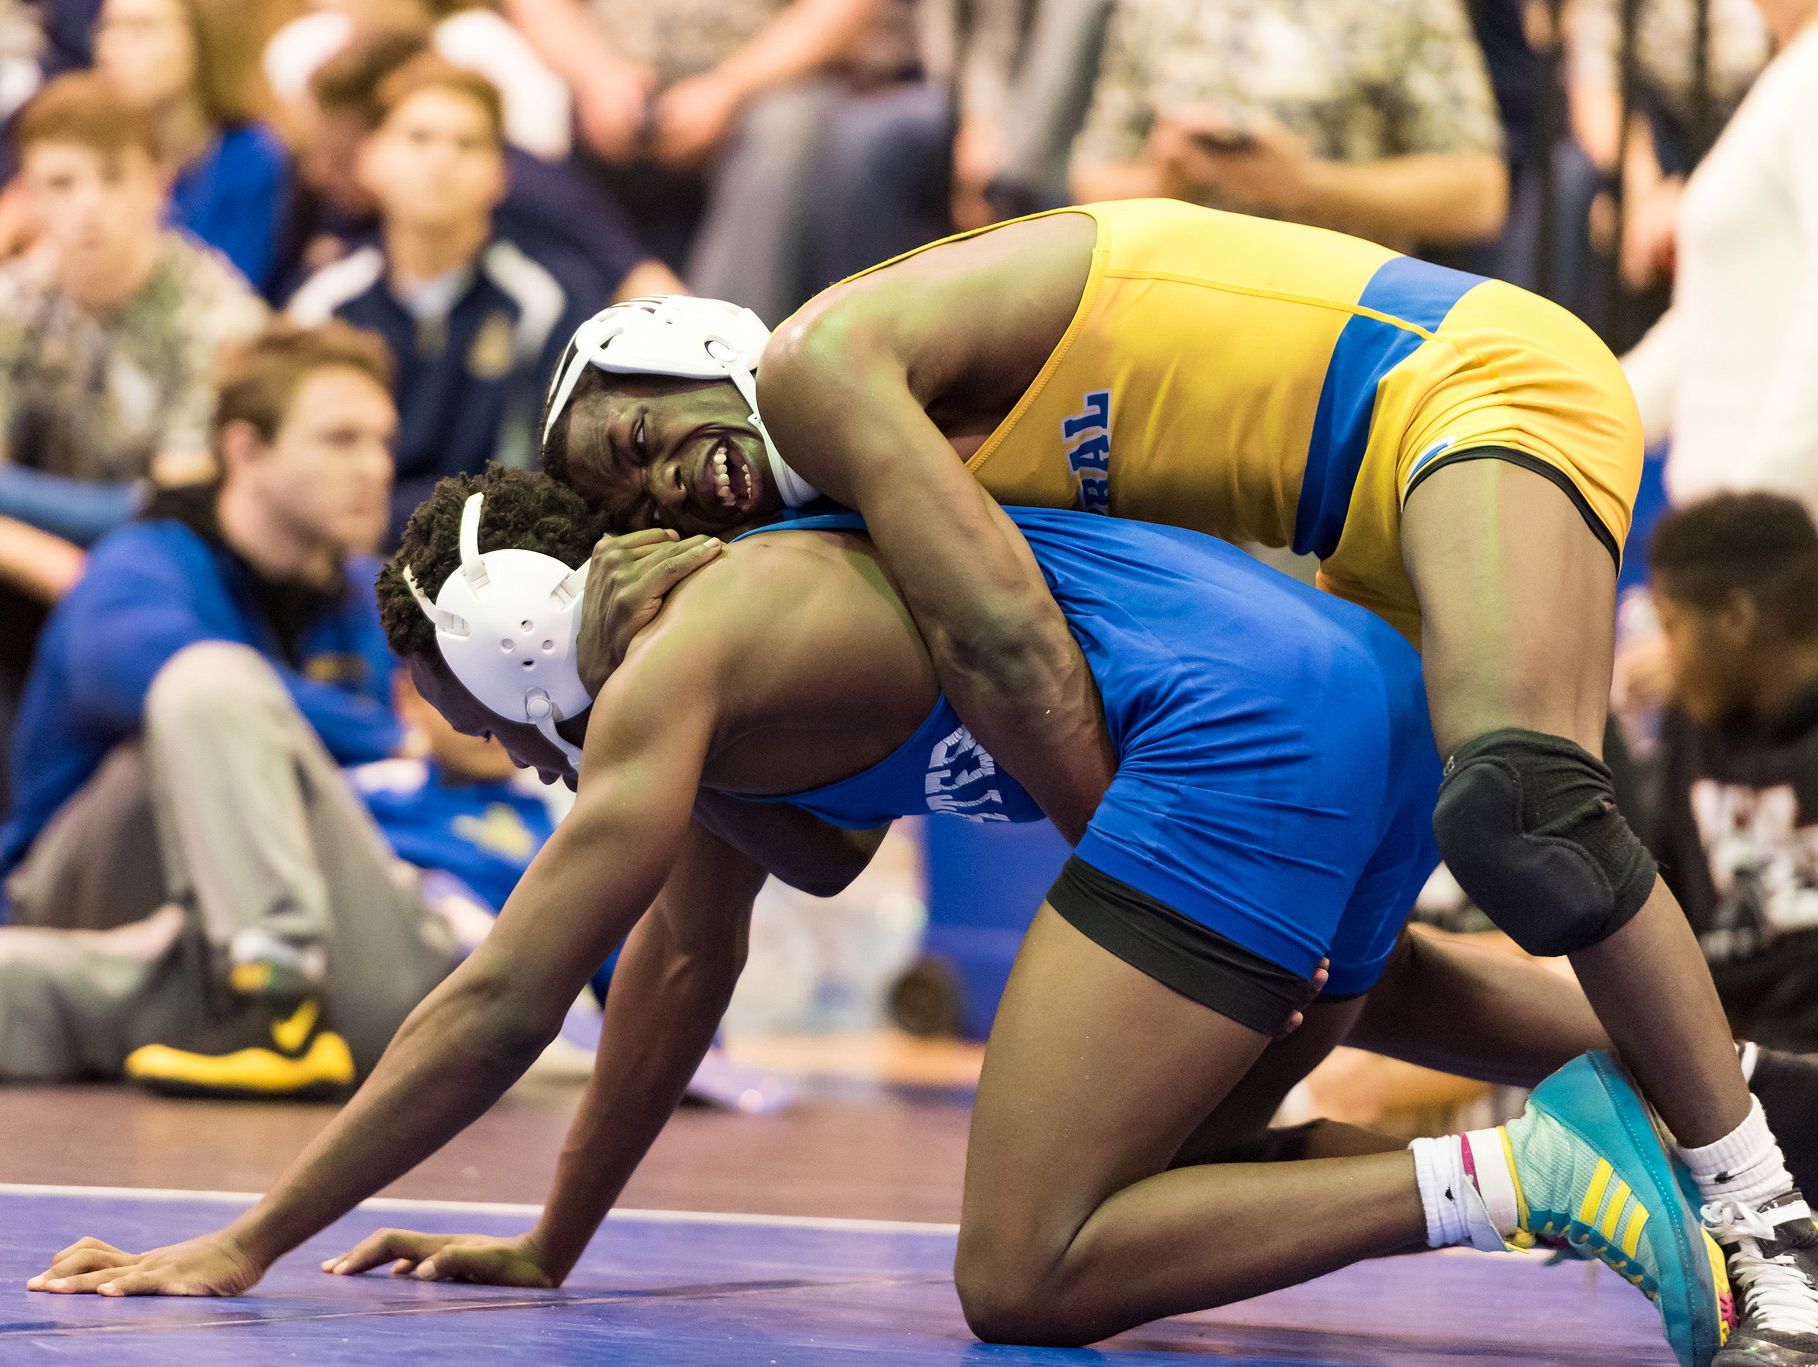 Rashad Stratton (top) of Sussex Central edges Jessey Muaka of Charter of Wilmington 4-3 in the 126-pound final at Saturday's Canal Classic at Middletown. The Golden Knights won the team title, and are currently ranked third in Division I.